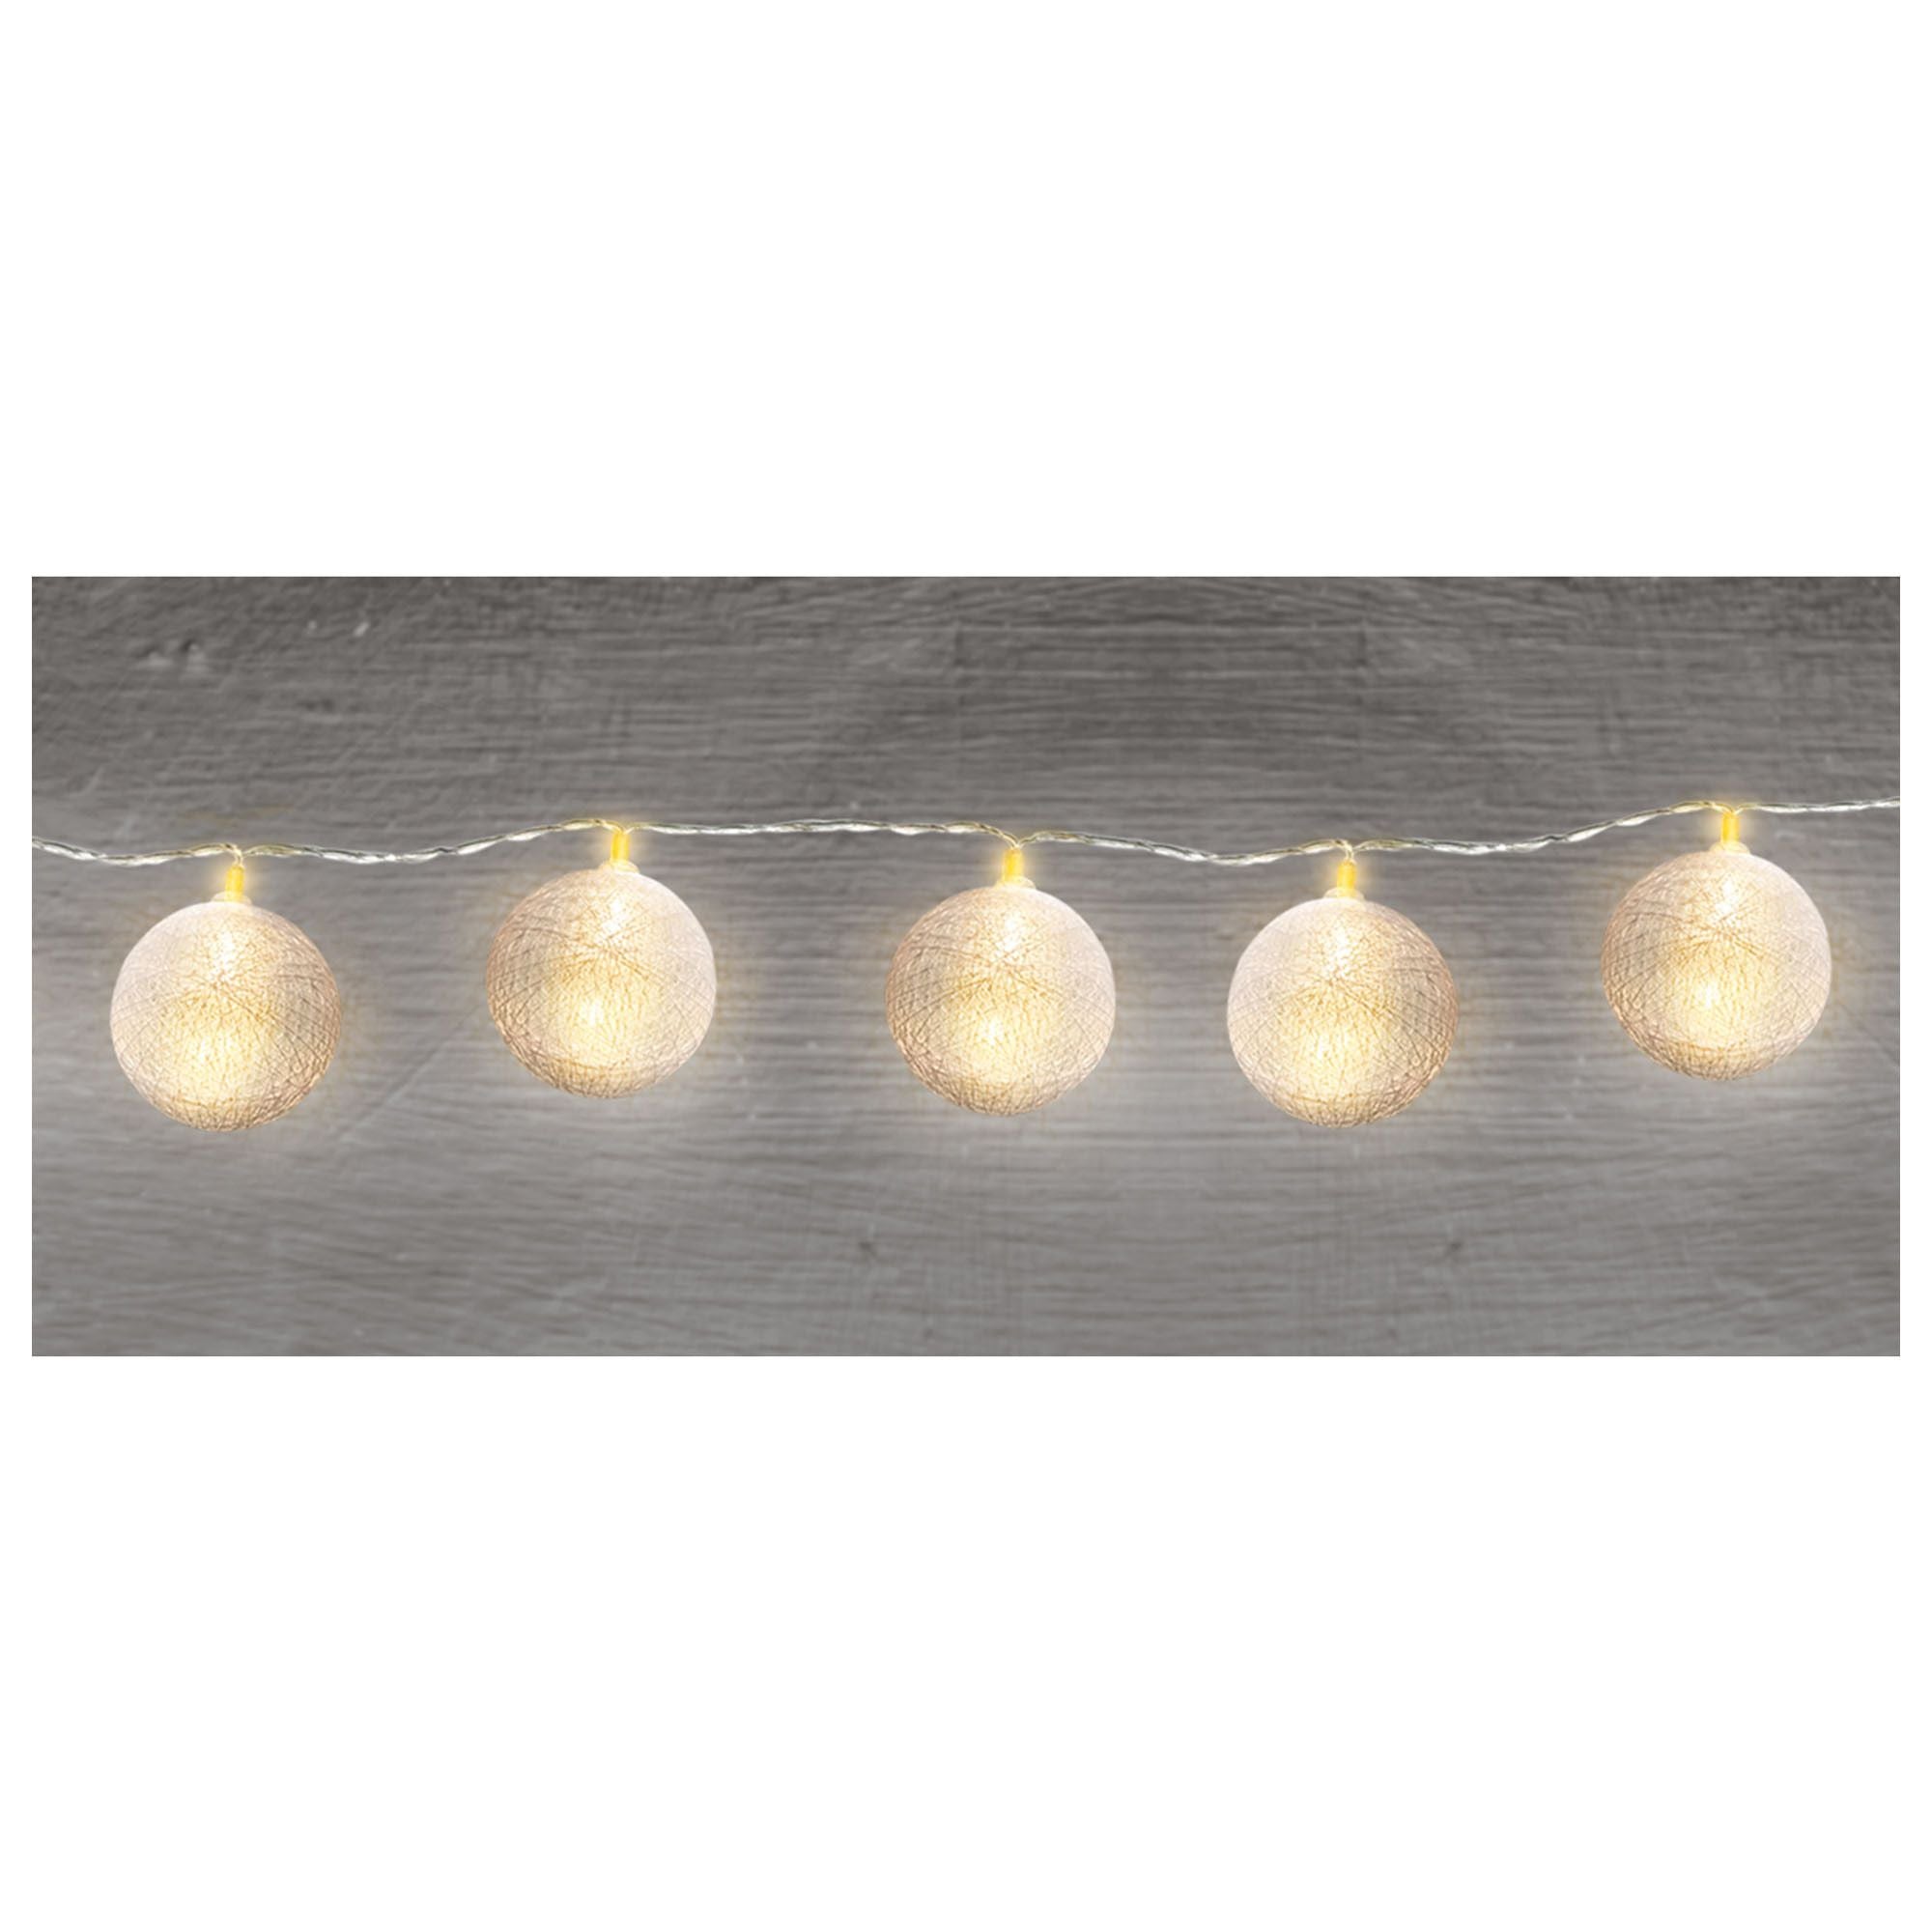 Amscan WEDDING White Cotton Balls Battery Operated LED String Lights